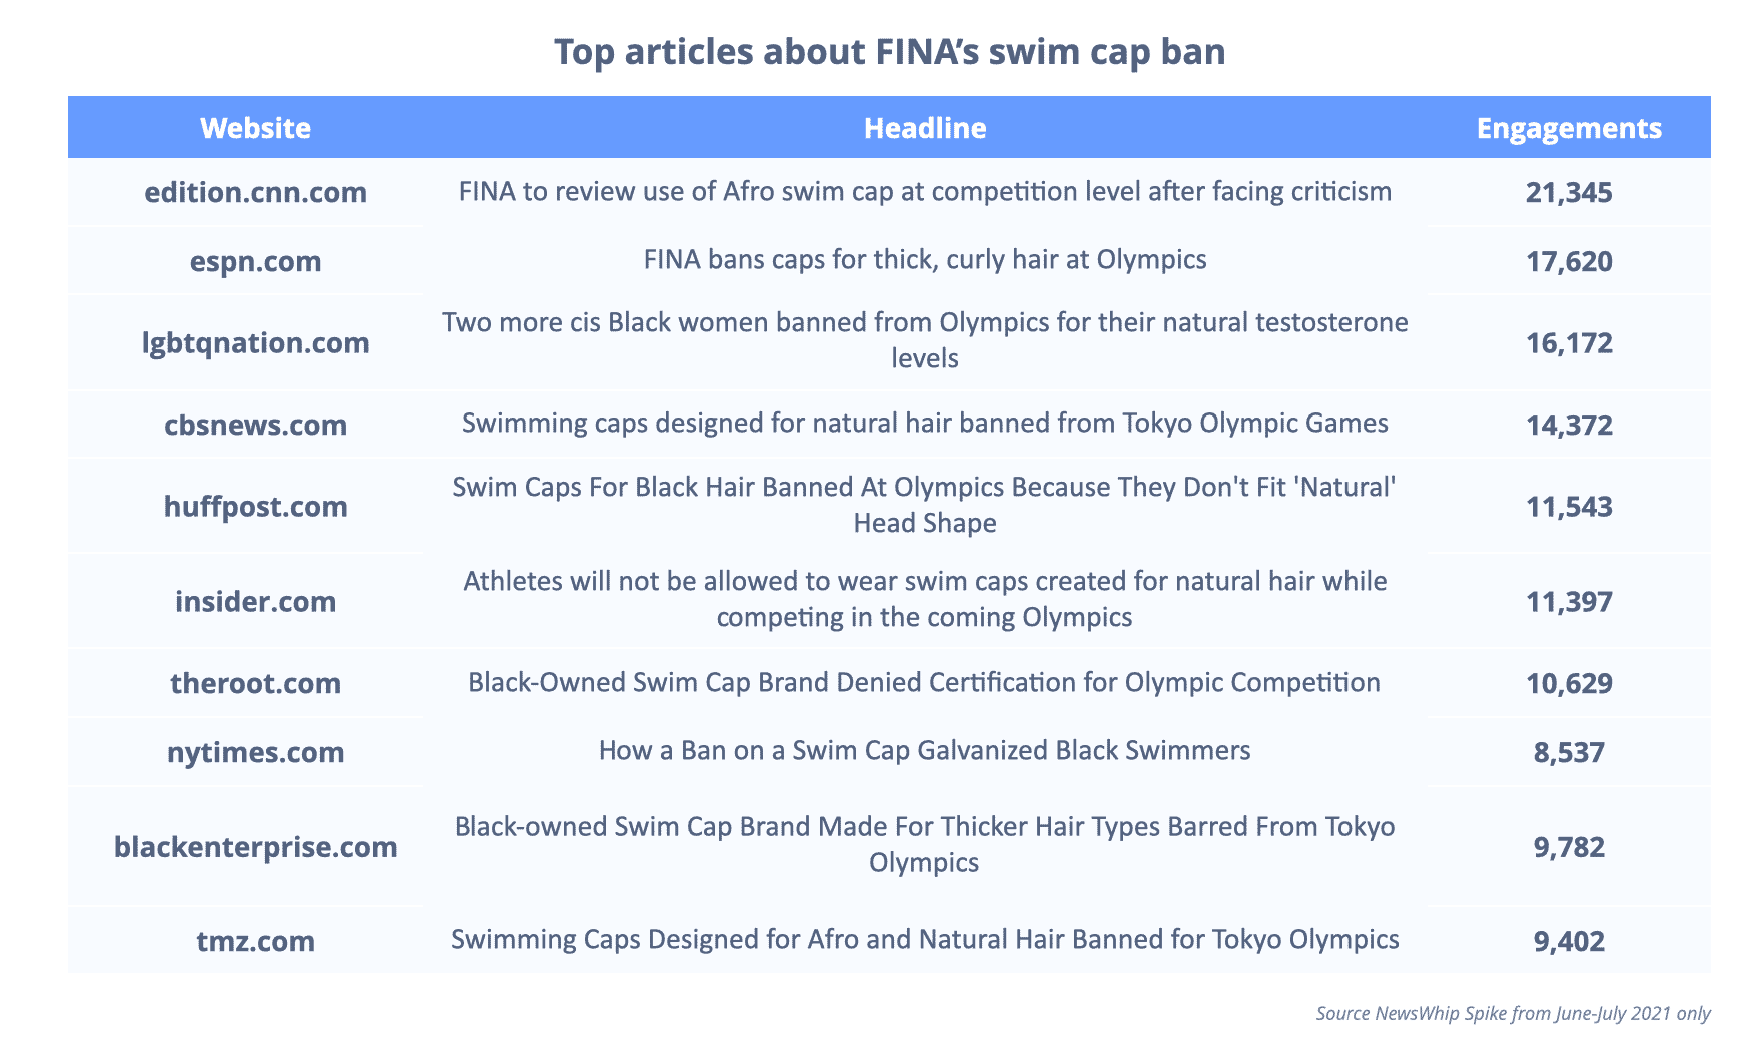 Chart showing the top stories about FINA's swim cap ban, ranked by engagement